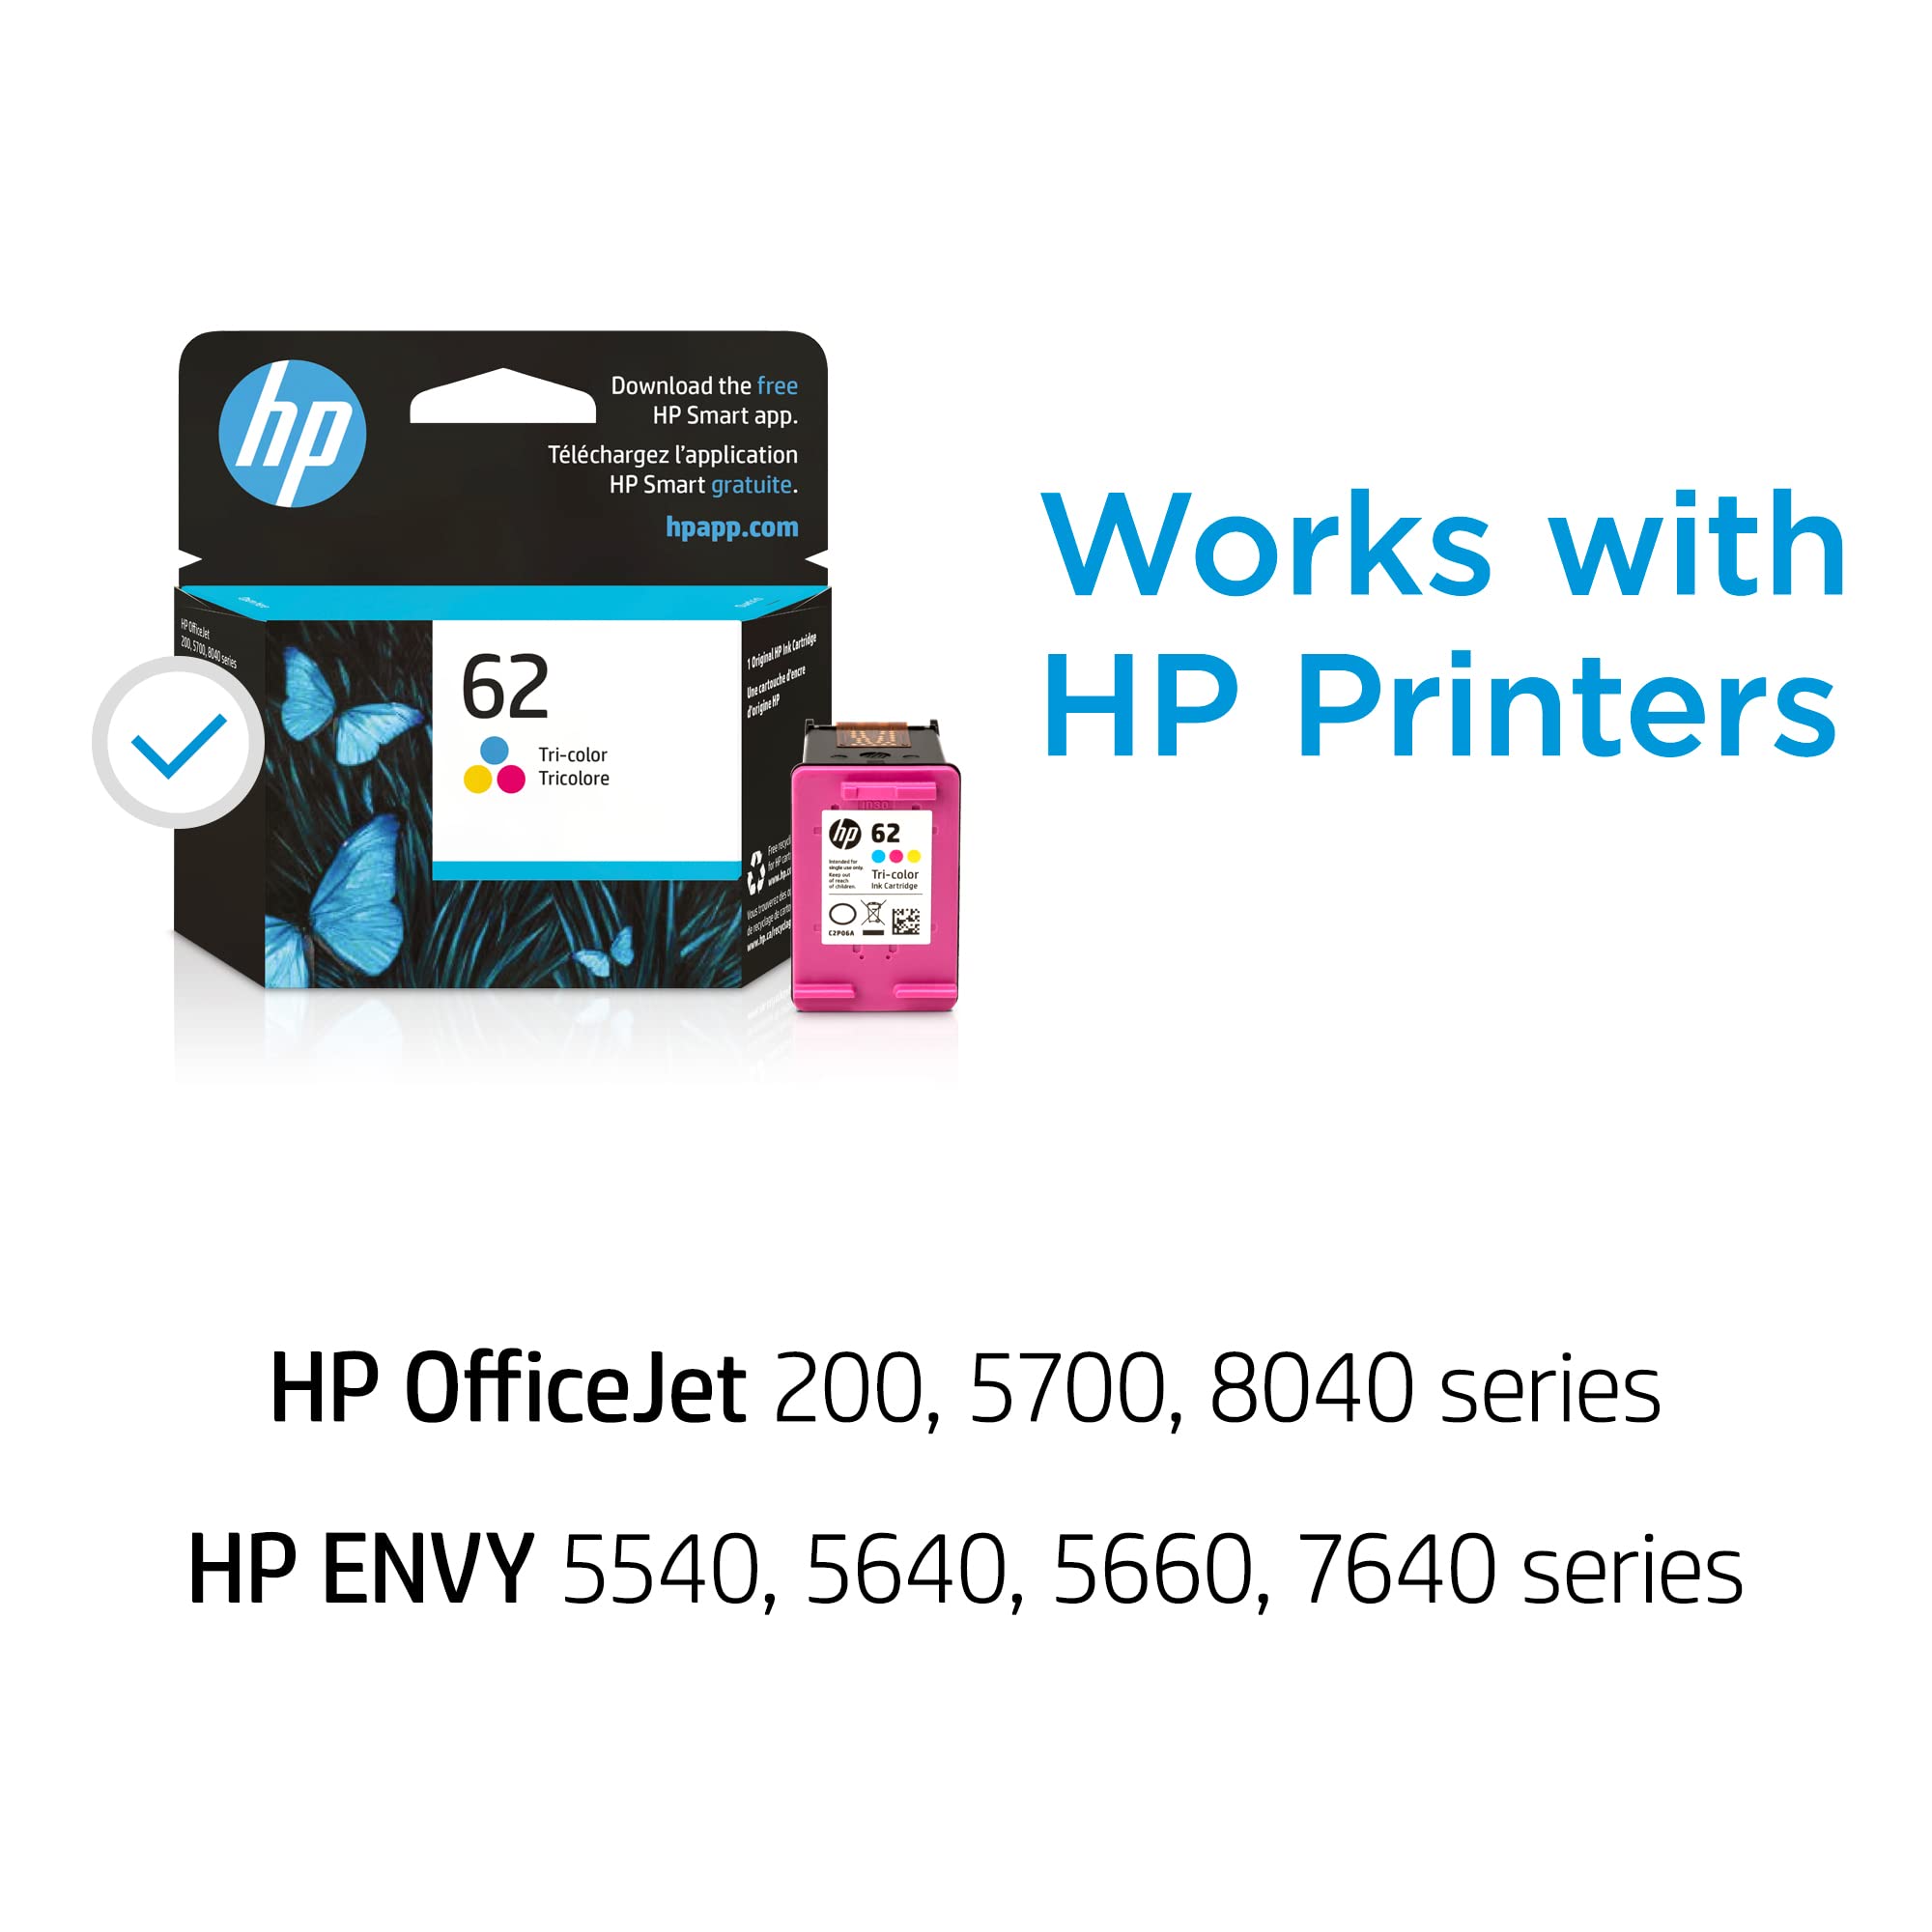 HP 62 Tri-color Ink Cartridge | Works with HP ENVY 5540, 5640, 5660, 7640 Series, HP OfficeJet 5740, 8040 Series, HP OfficeJet Mobile 200, 250 Series | Eligible for Instant Ink | C2P06AN